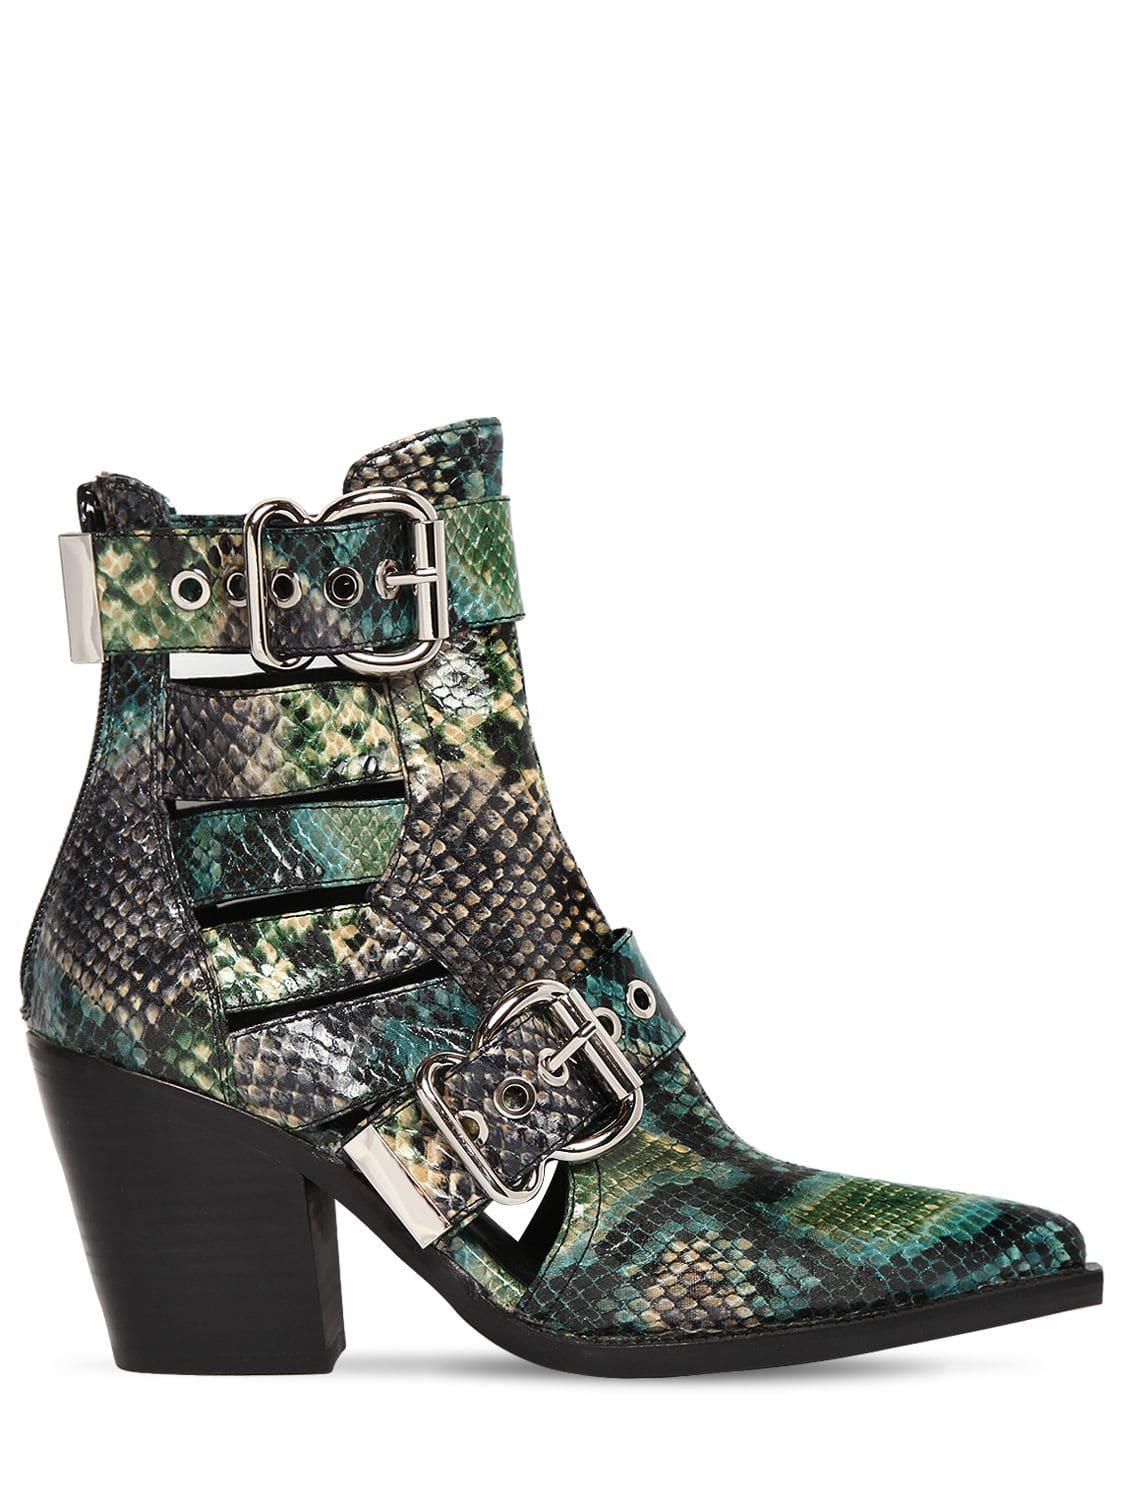 Jeffrey Campbell 75mm Guadalupe Snake Print Leather Boots in Green | Lyst